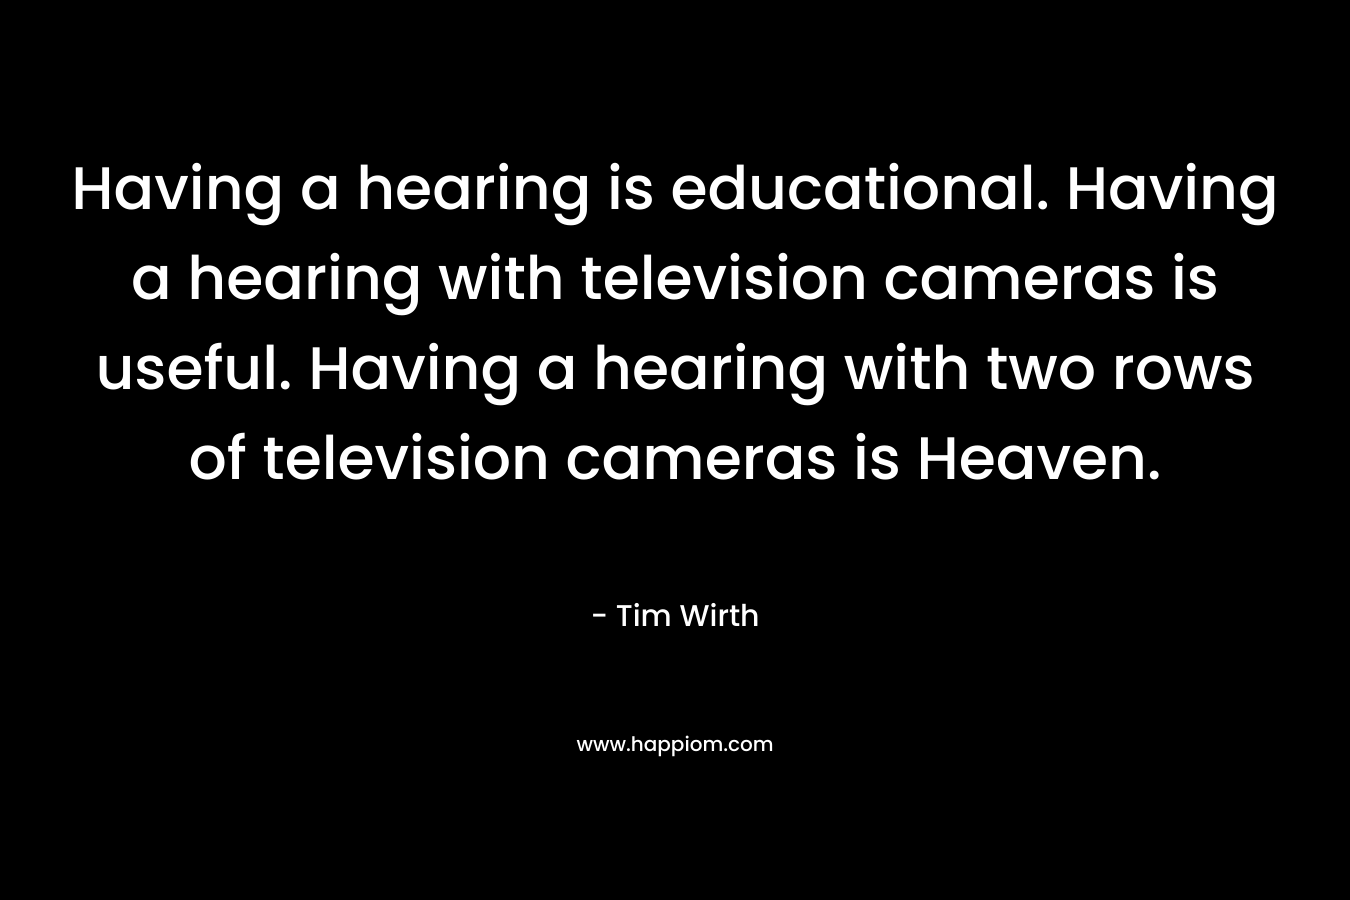 Having a hearing is educational. Having a hearing with television cameras is useful. Having a hearing with two rows of television cameras is Heaven. – Tim Wirth